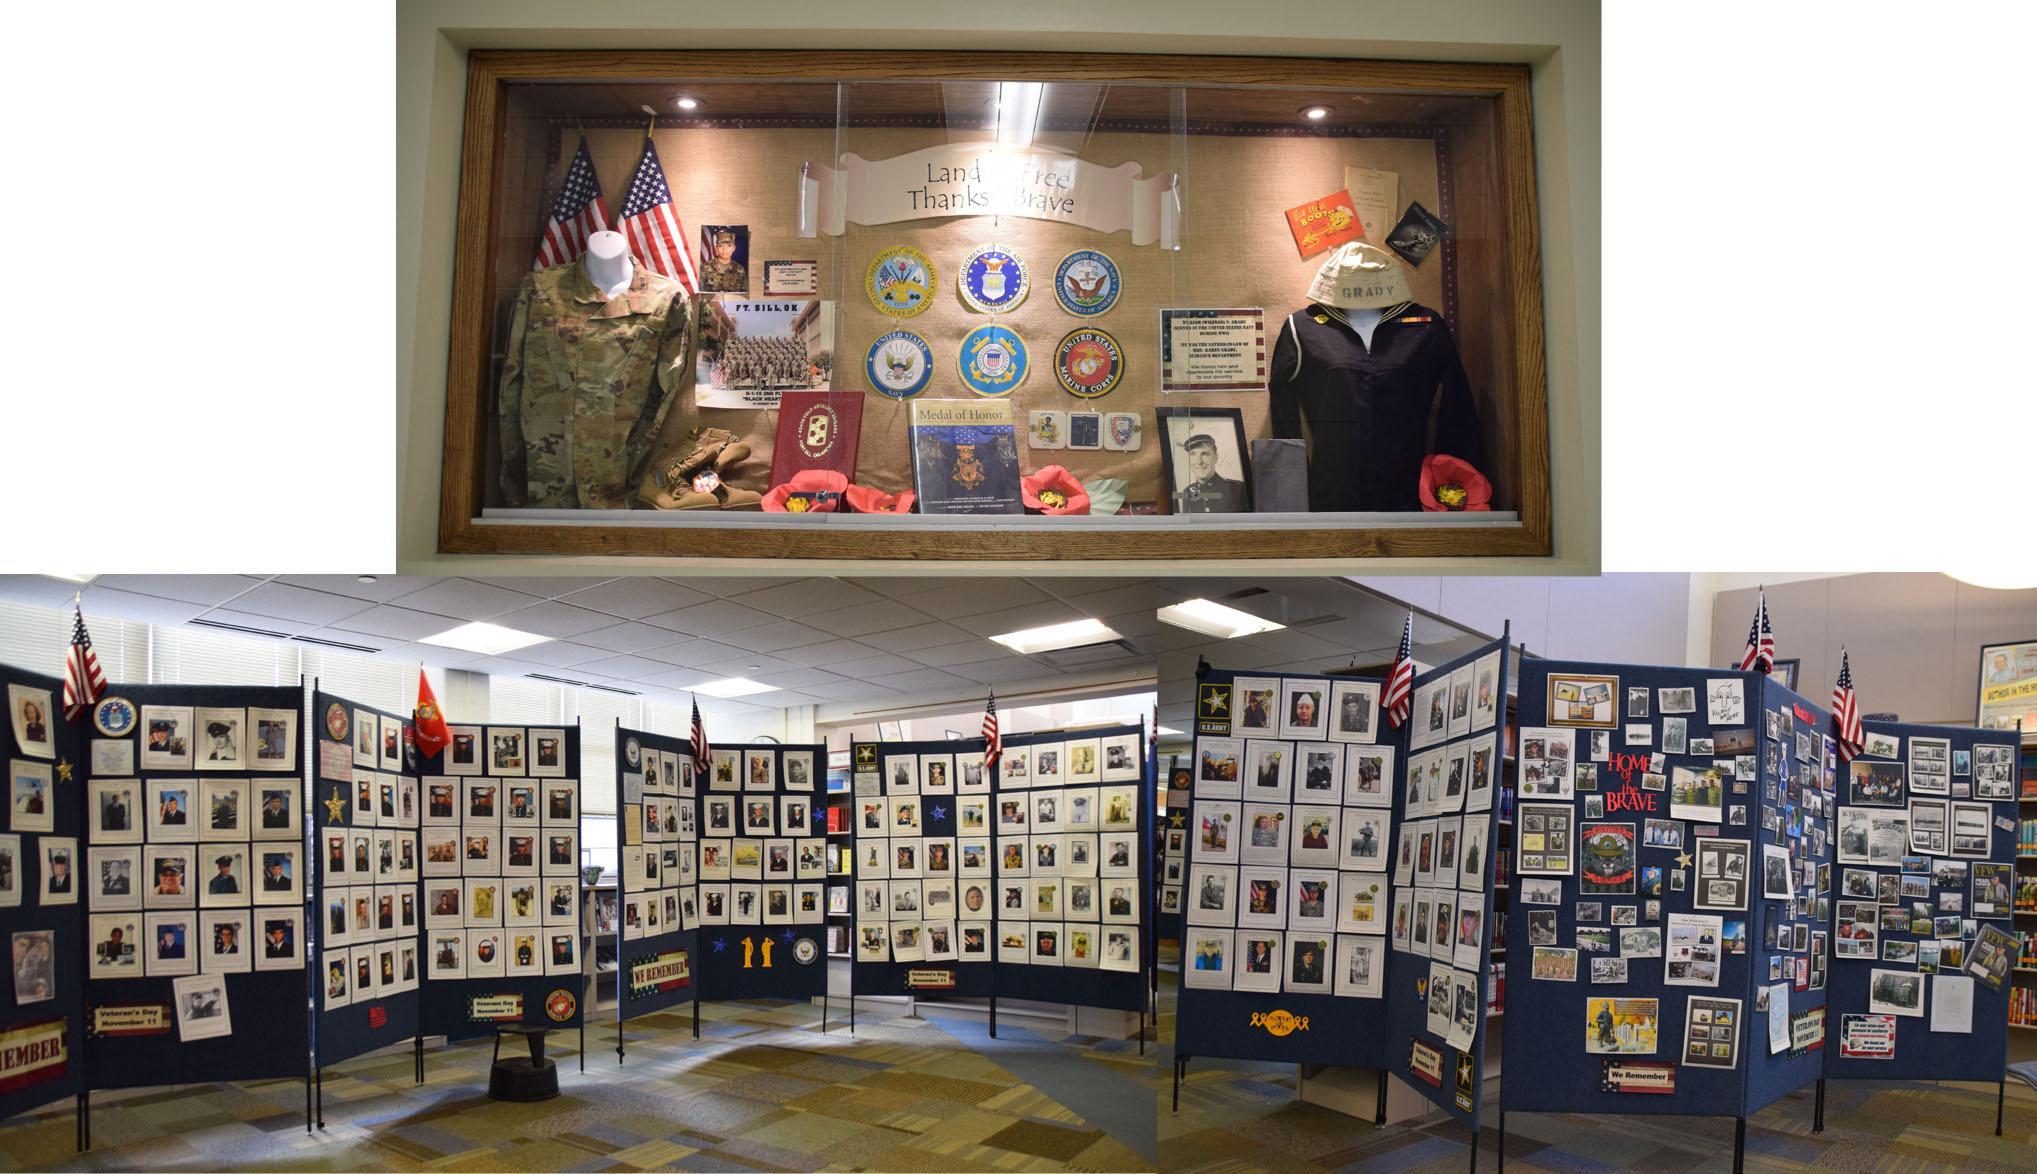 Addison Trail requesting items for Veterans Day display and video